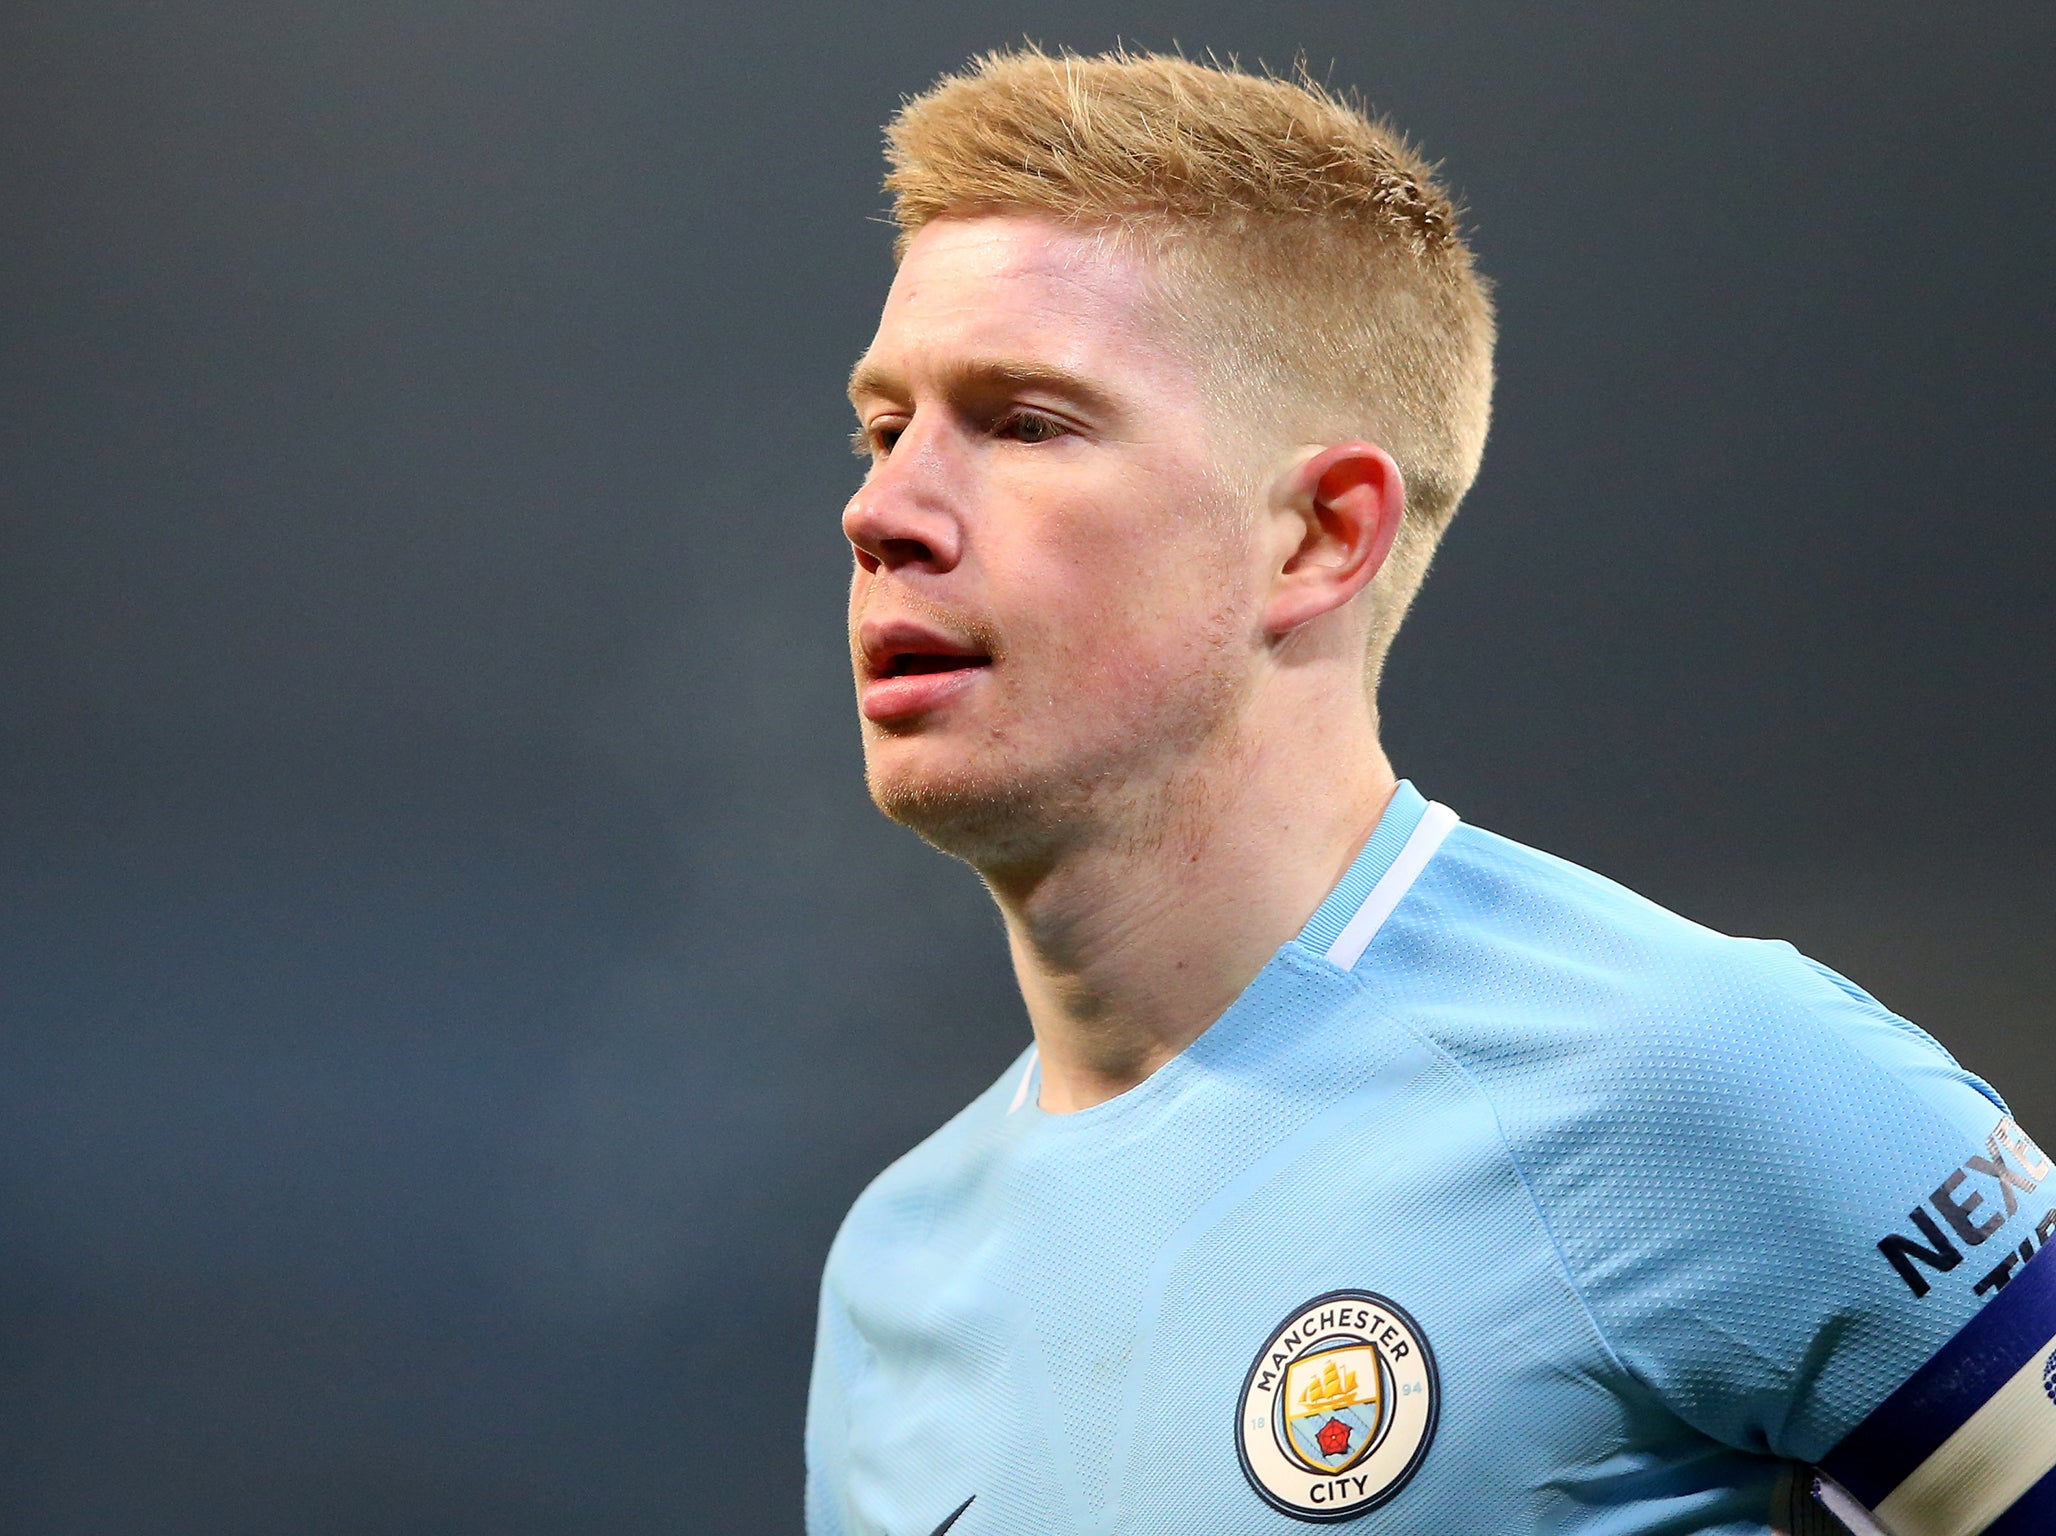 The likes of Kevin de Bruyne and David Silva have been key to helping Guardiola shape his philosophy at City